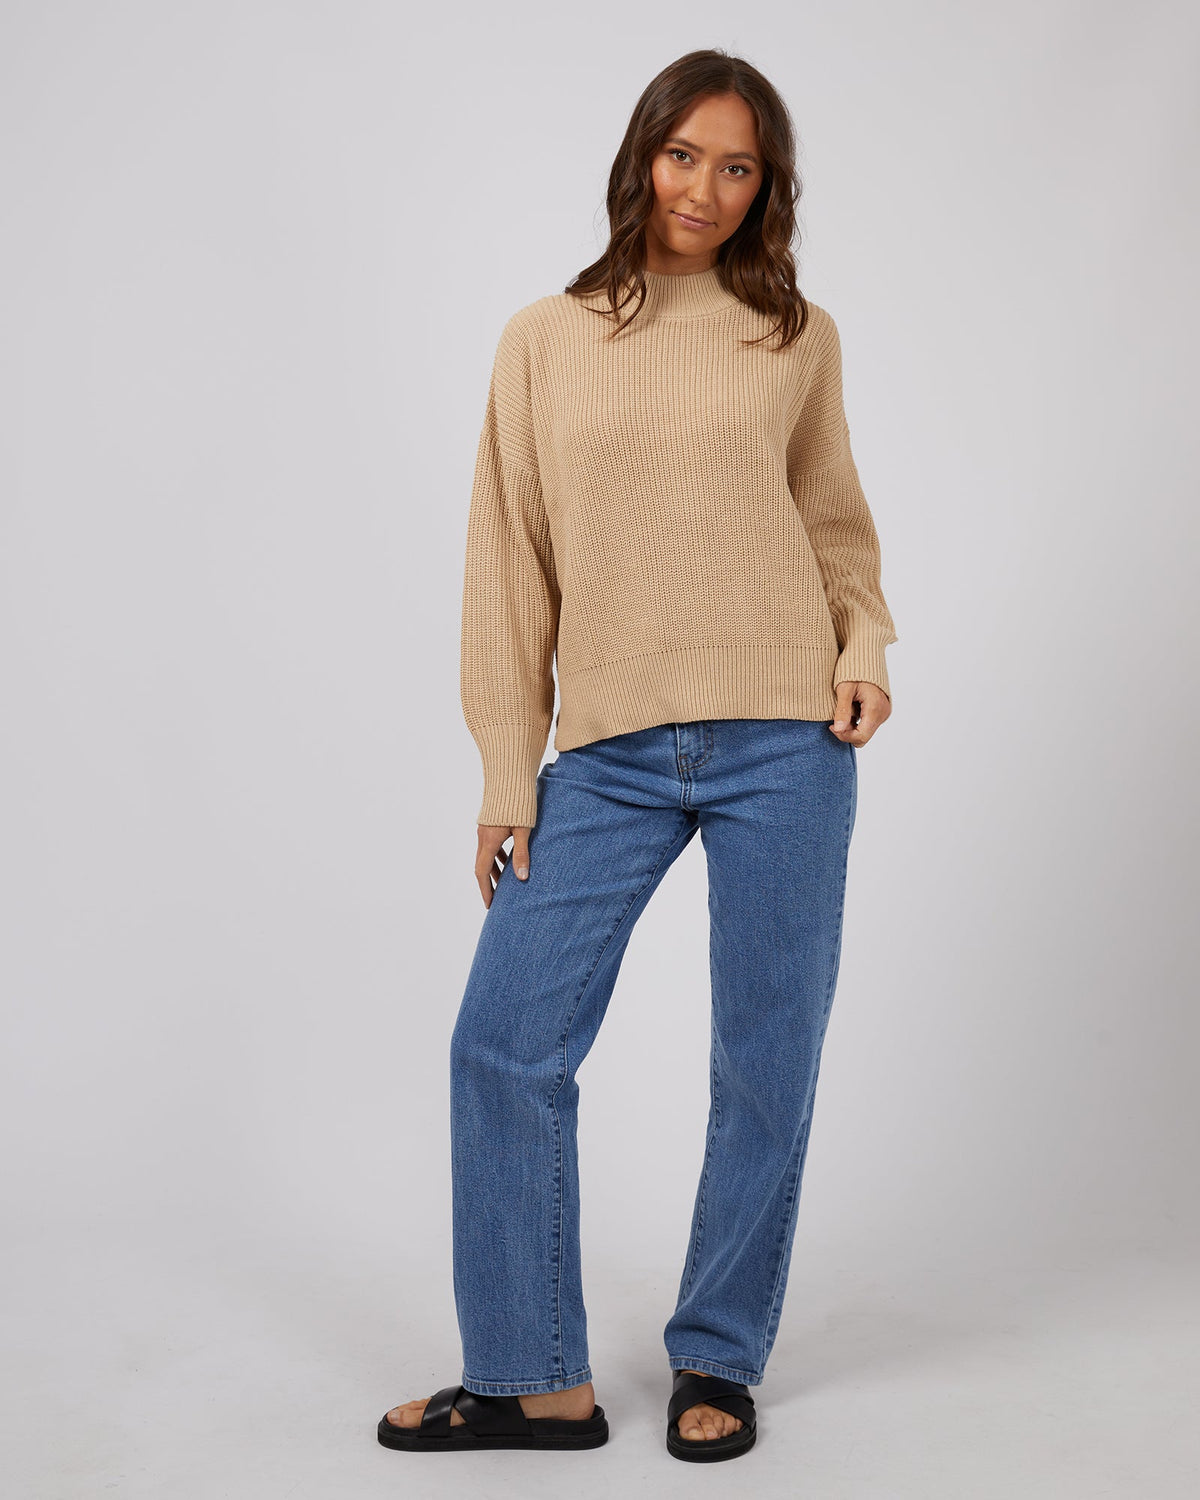 Silent Theory Ladies-Arlo Knit Oatmeal-Edge Clothing